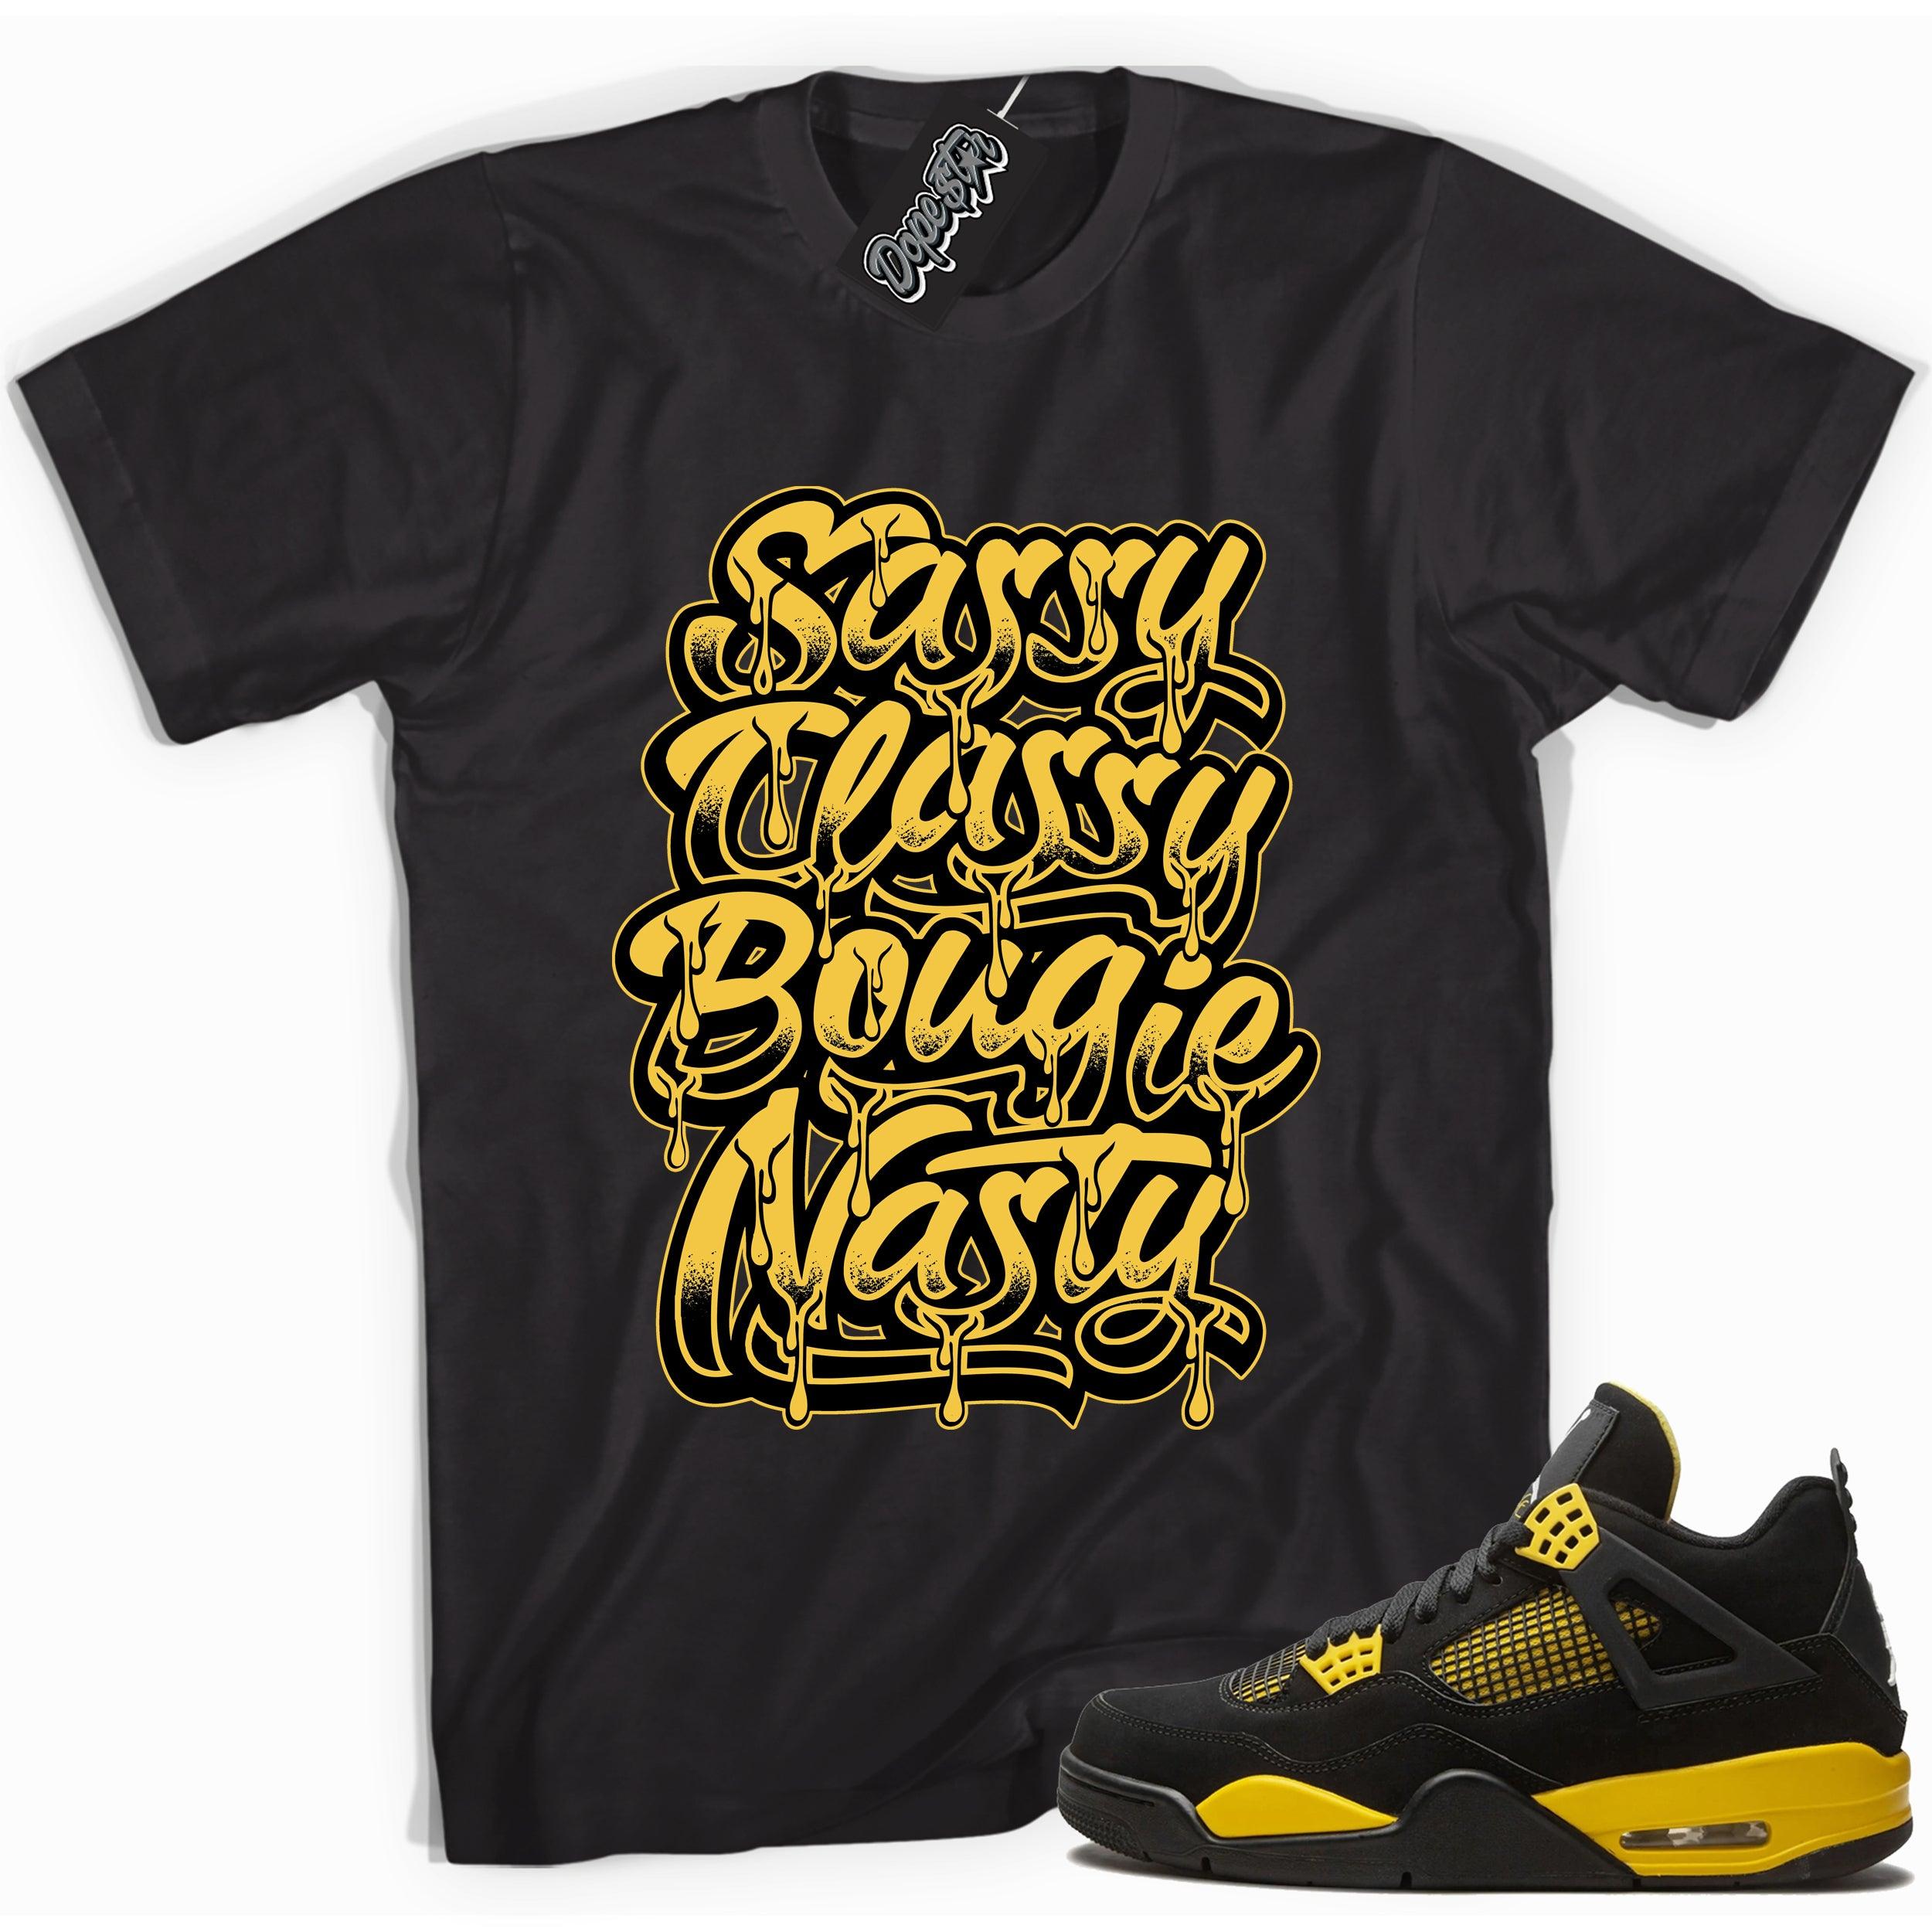 Cool black graphic tee with 'sassy classy bougie nasty' print, that perfectly matches  Air Jordan 4 Thunder sneakers